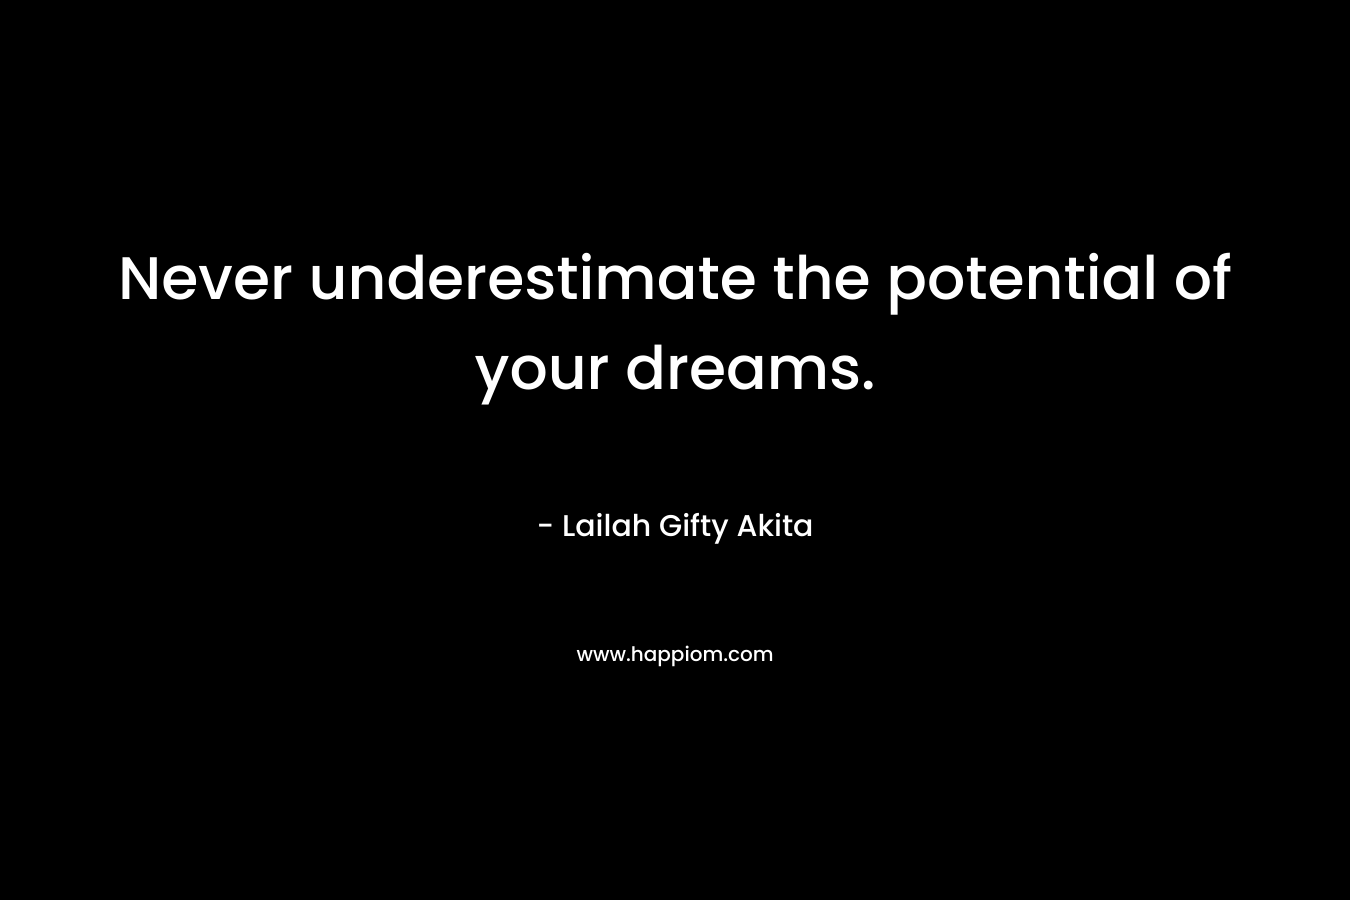 Never underestimate the potential of your dreams. – Lailah Gifty Akita